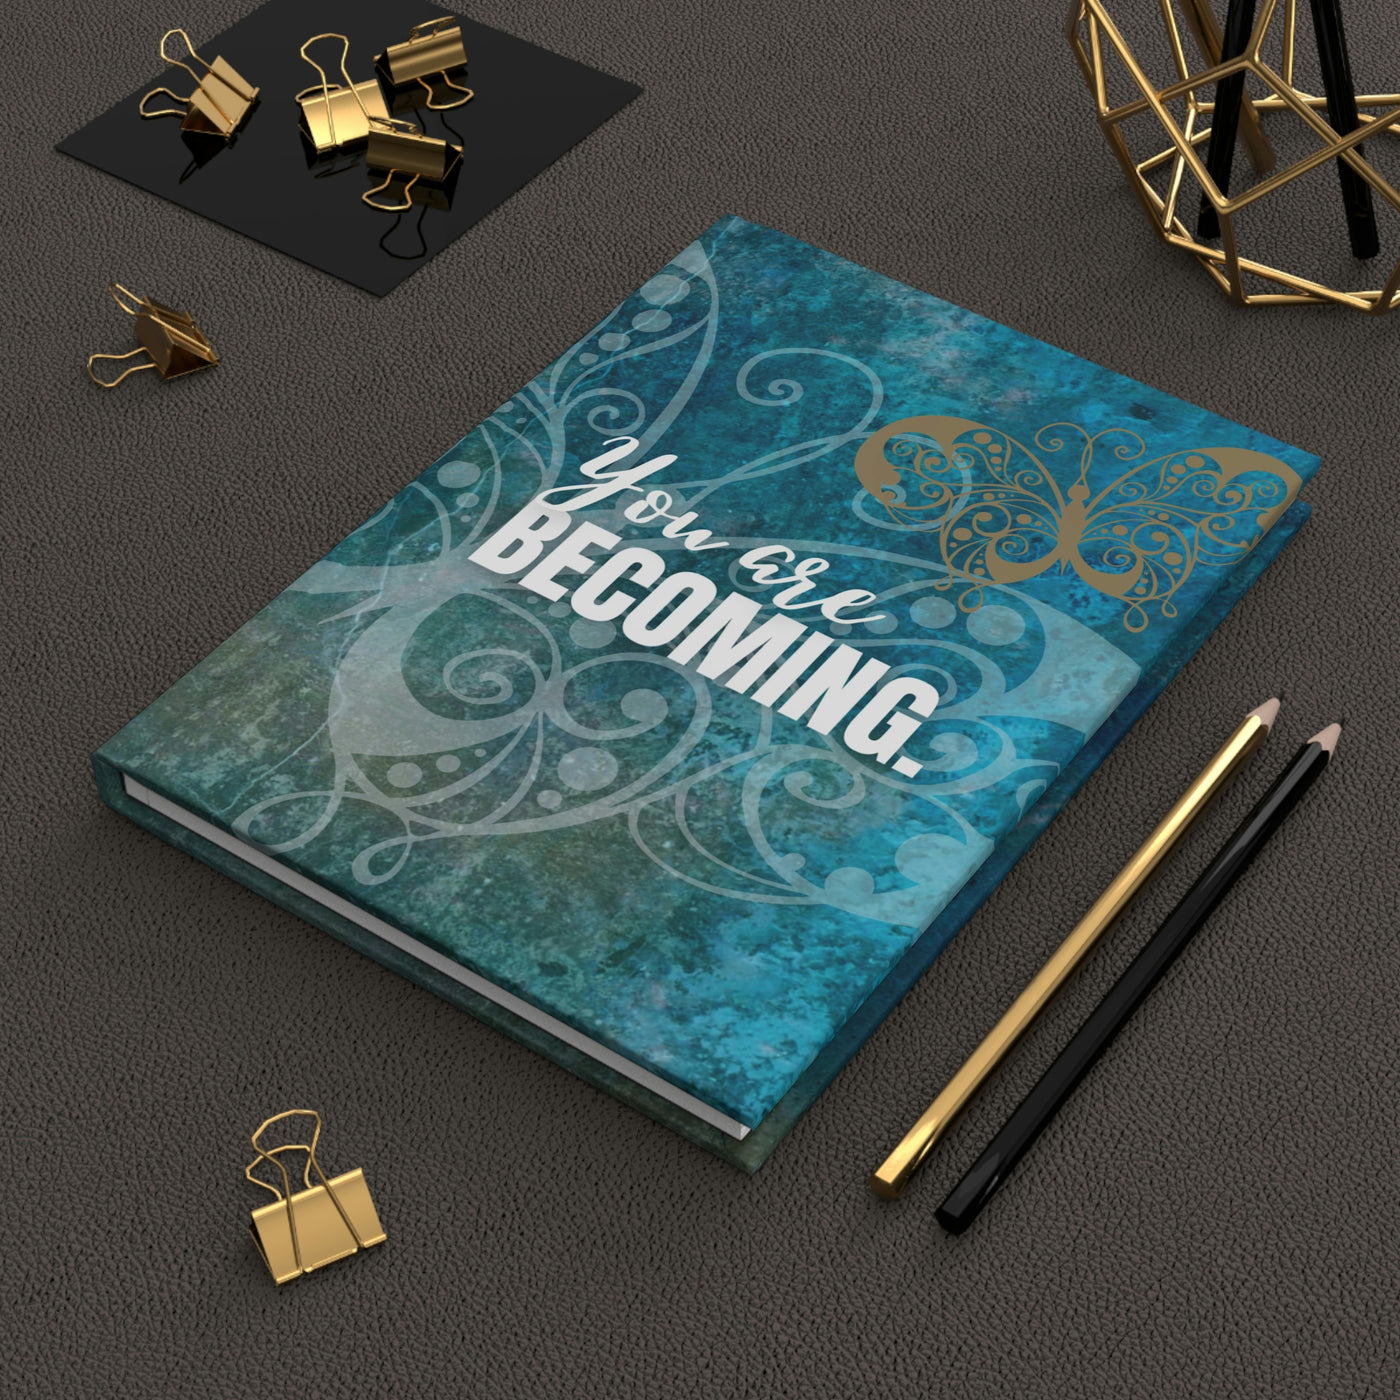 Butterfly/Becoming Journal - Hardcover